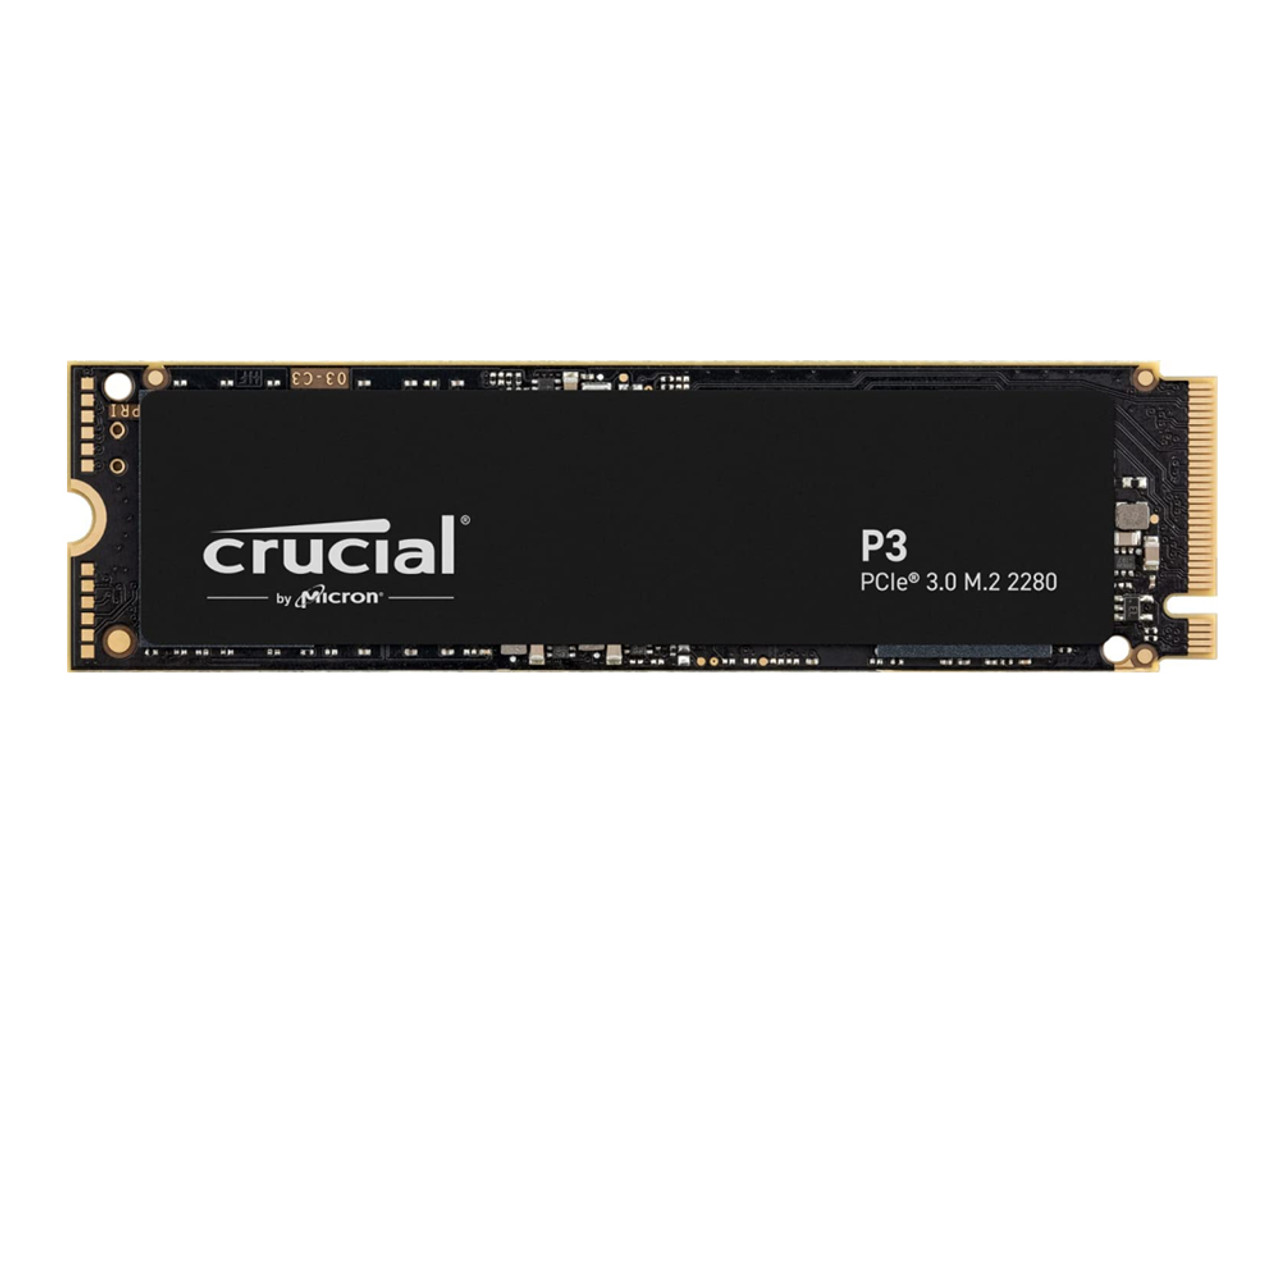 Crucial CT500P3SSD8 P3 500GB PCIe 3.0 3D NAND NVMe M.2 SSD, up to 3500MB/s Internal Solid State Drive